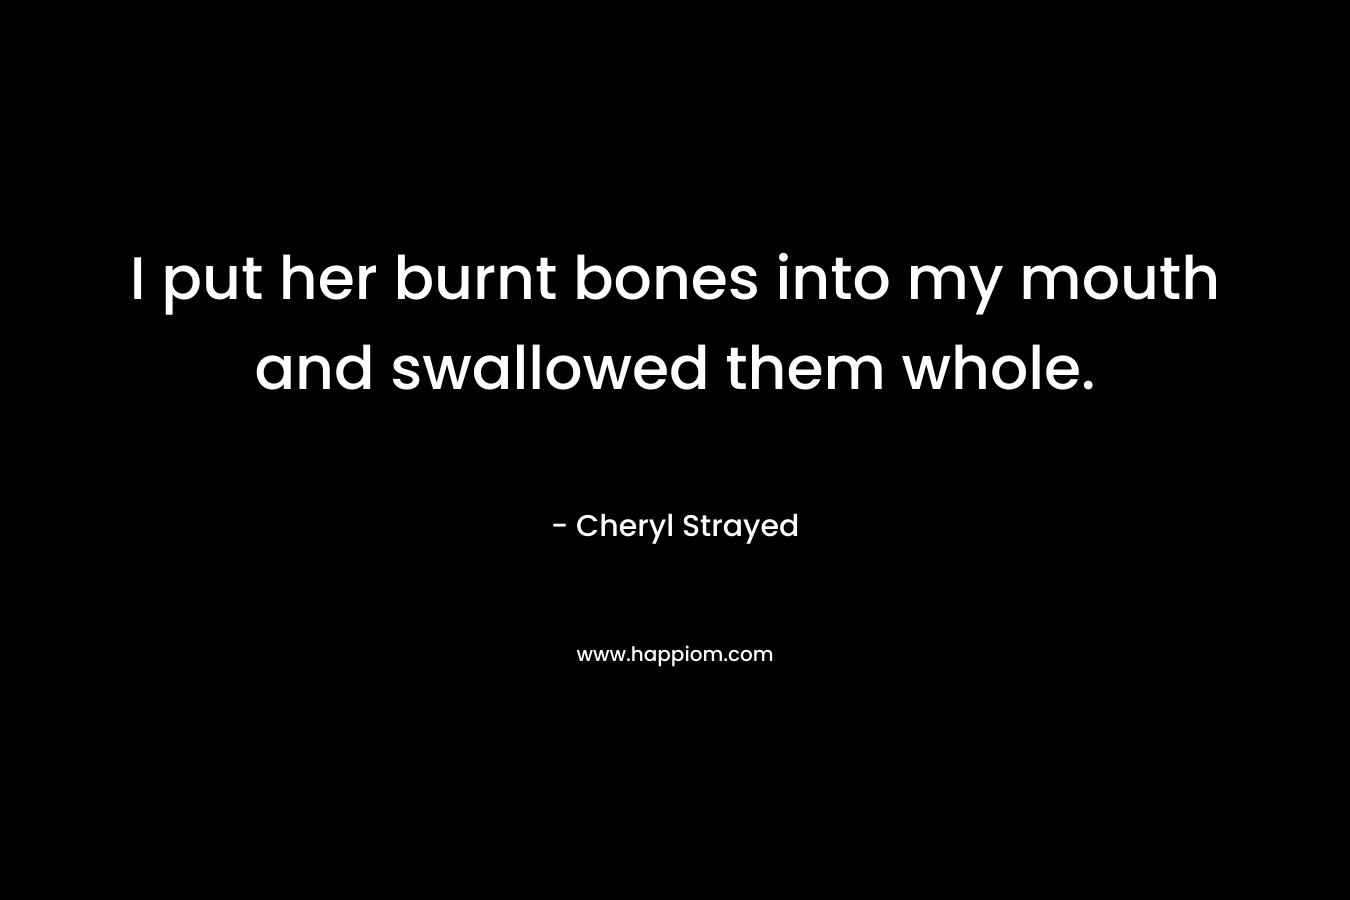 I put her burnt bones into my mouth and swallowed them whole. – Cheryl Strayed